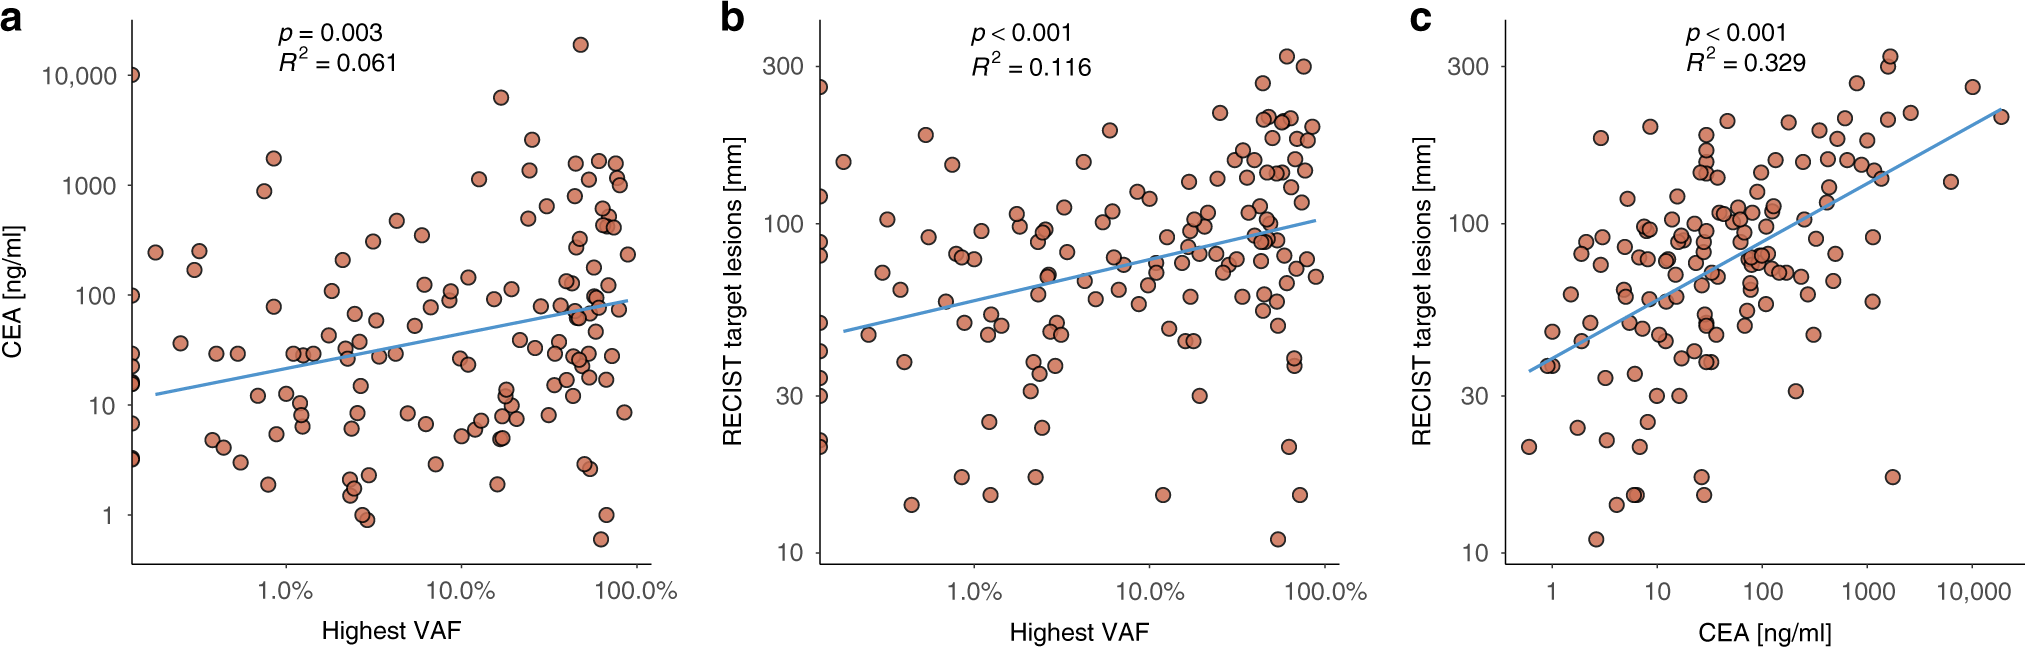 Variant allele frequency in baseline circulating tumour DNA to measure  tumour burden and to stratify outcomes in patients with RAS wild-type  metastatic colorectal cancer: a translational objective of the Valentino  study